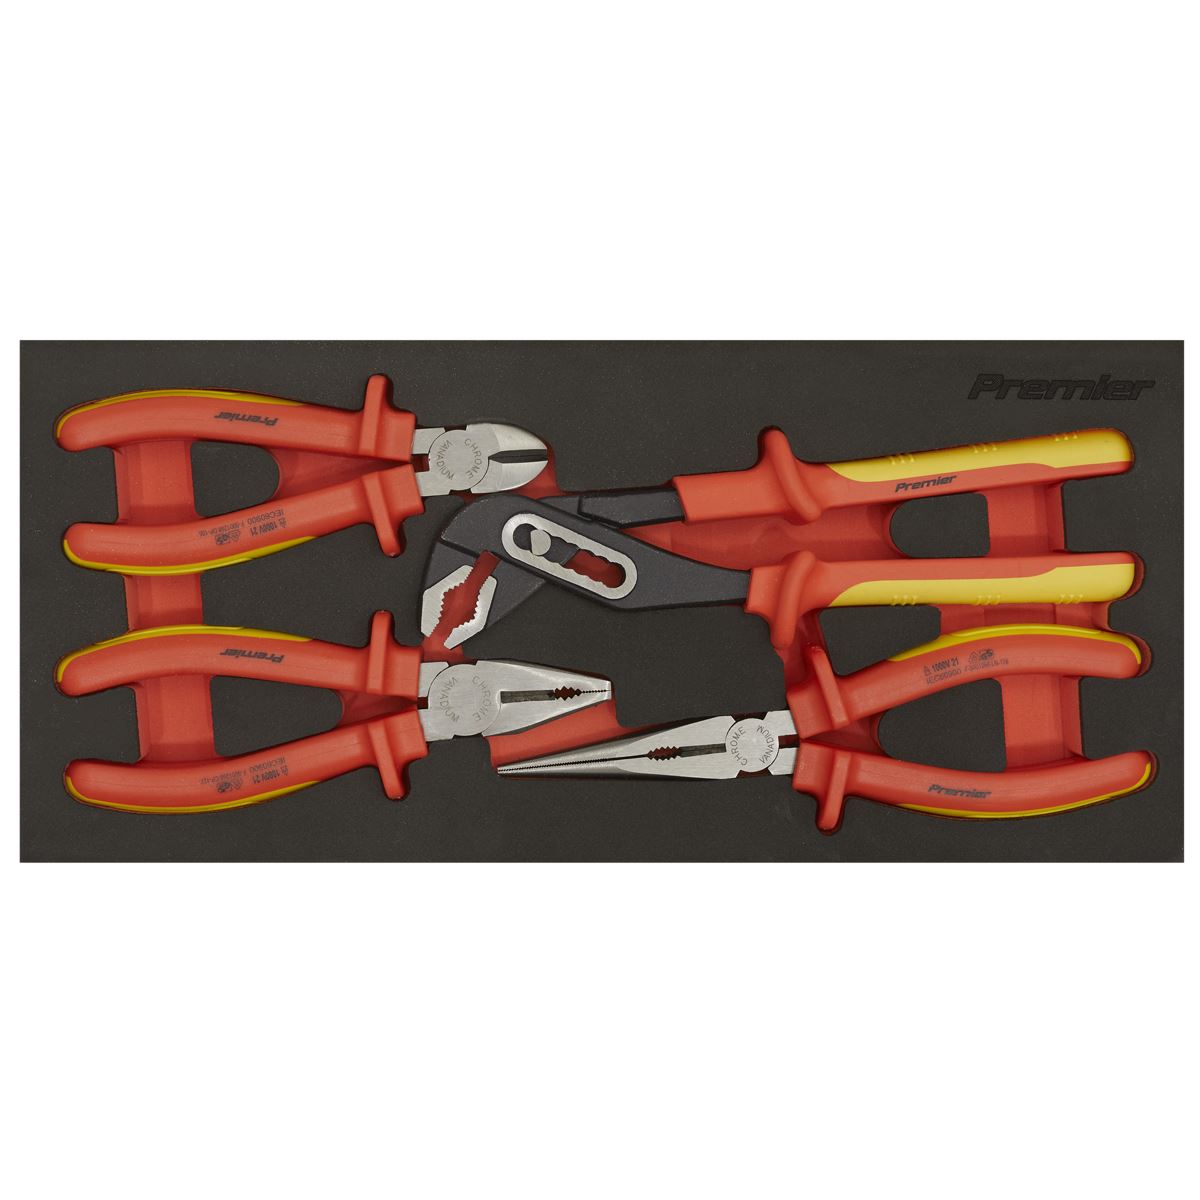 Sealey Premier Insulated Pliers Set 4pc with Tool Tray - VDE Approved